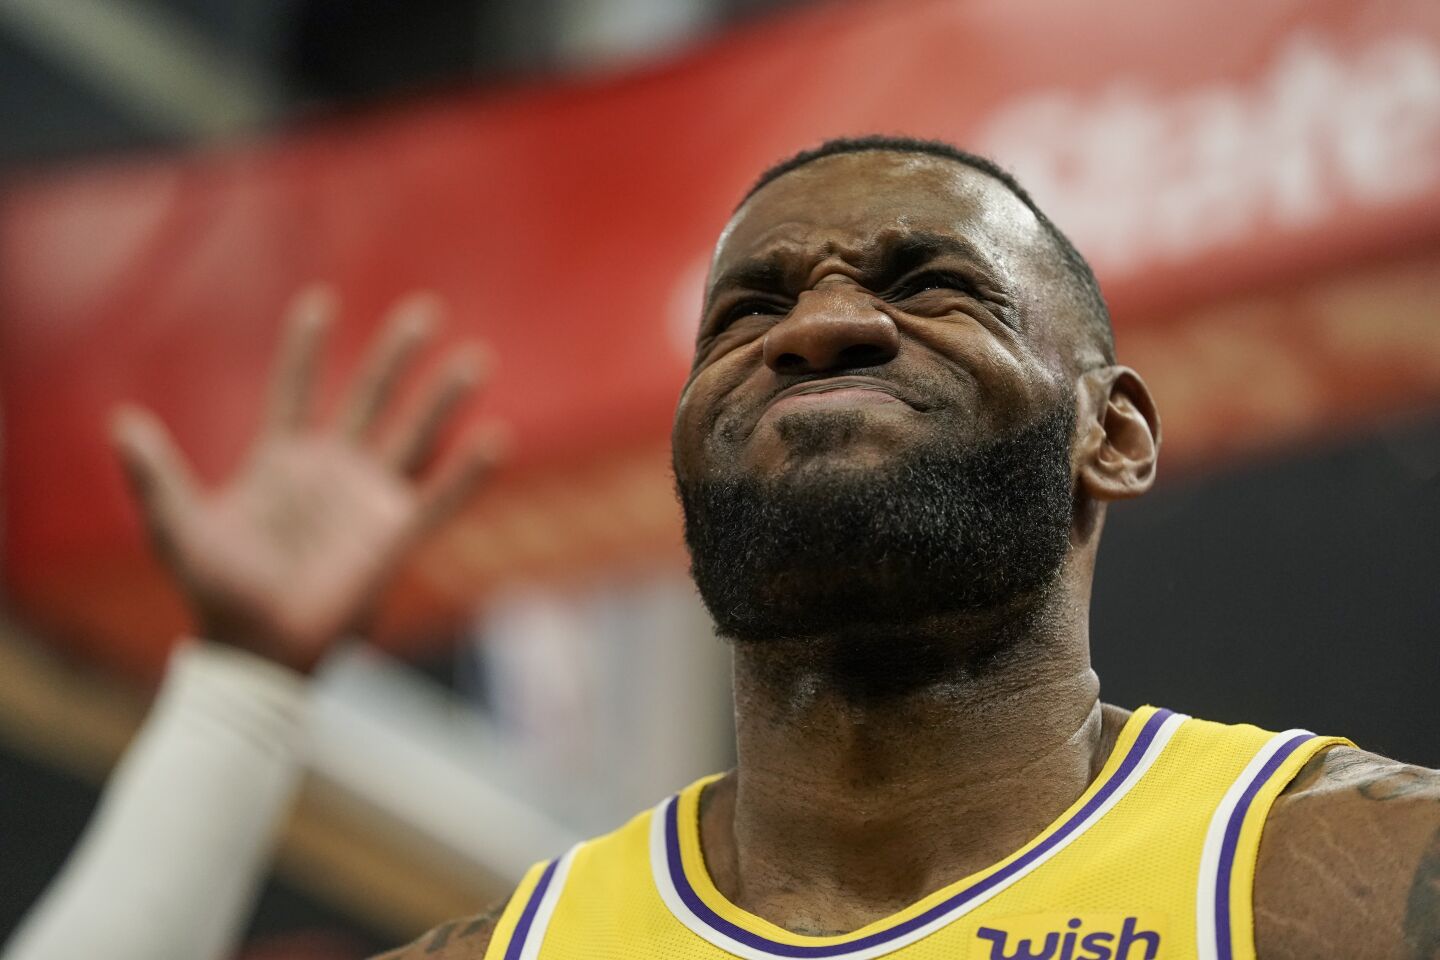 LeBron James reacts to a call during the first half of a game against the Bucks on Dec. 19.